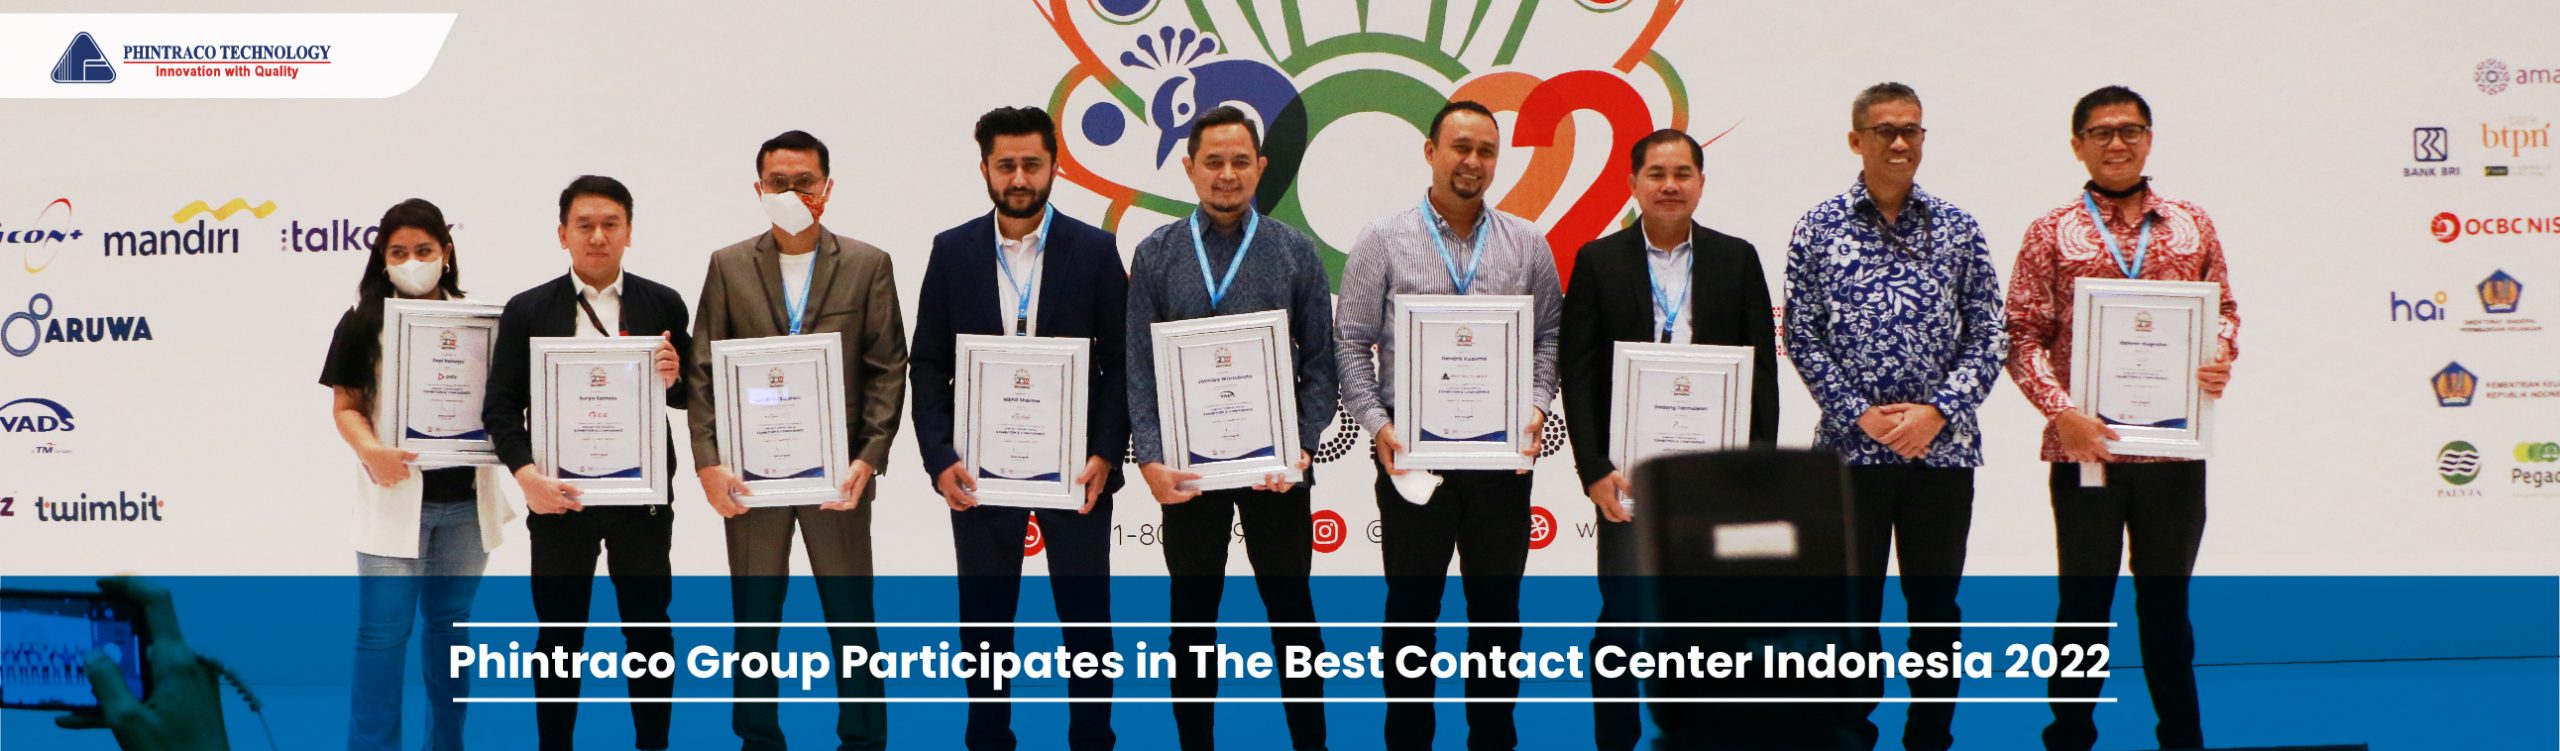 Phintraco Technology Participates in The Best Contact Center Indonesia 2022